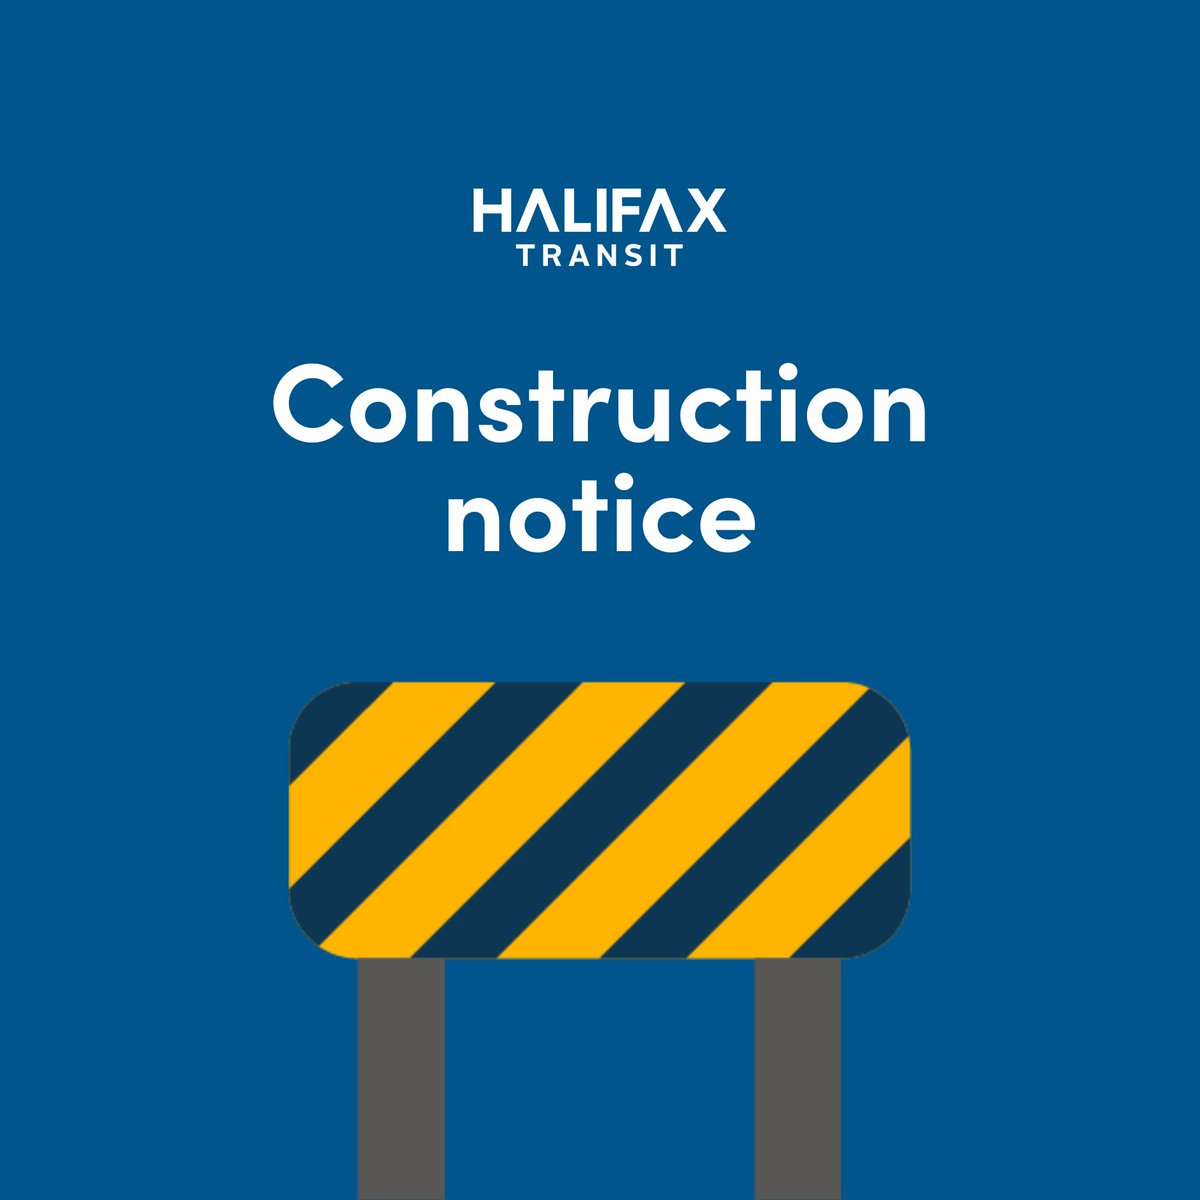 Stop Sea King Dr After Lancaster Dr (8263) will be closed from Thurs., May 2, 2024, until further notice, due to construction. Passengers on Route 72 are directed to Stop Pinecrest Dr After Albro Lake Rd (7449). More info: halifax.ca/htdisruptions#…